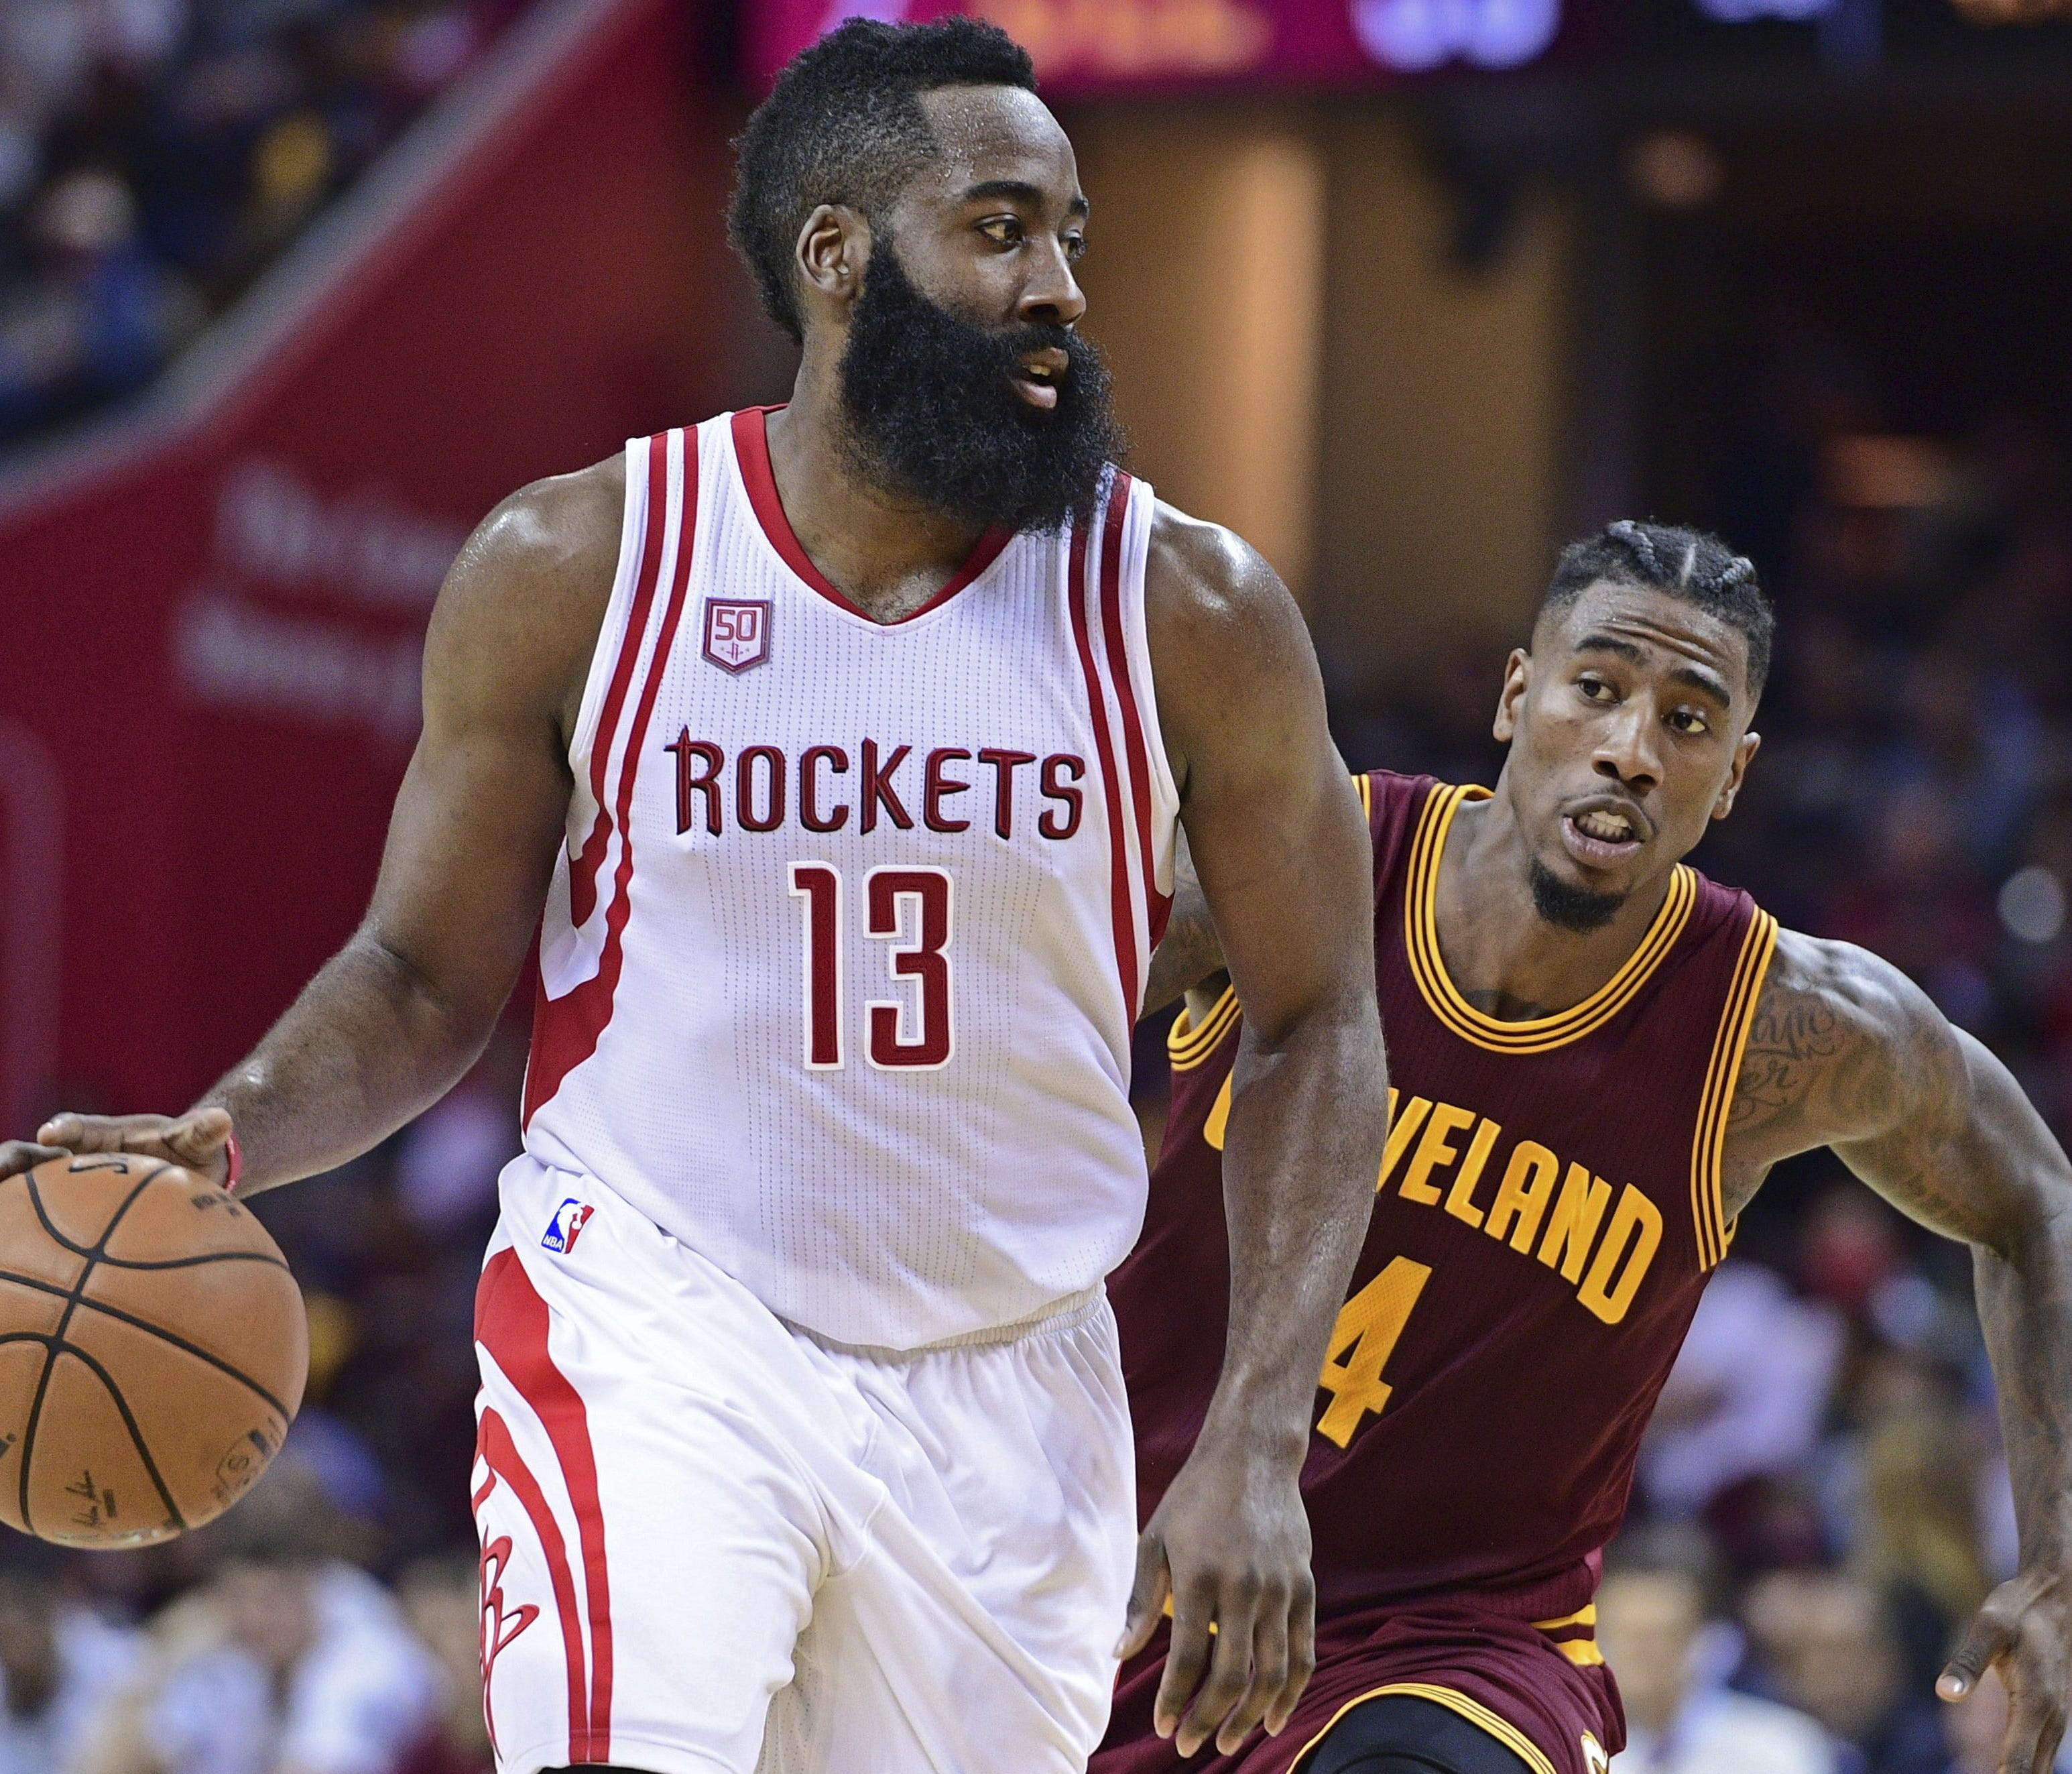 Houston Rockets guard James Harden (13) dribbles as Cleveland Cavaliers guard Iman Shumpert (4) closes in during the first half of an NBA basketball game Tuesday, Nov. 1, 2016, in Cleveland. (AP Photo/David Dermer) ORG XMIT: OHDD105